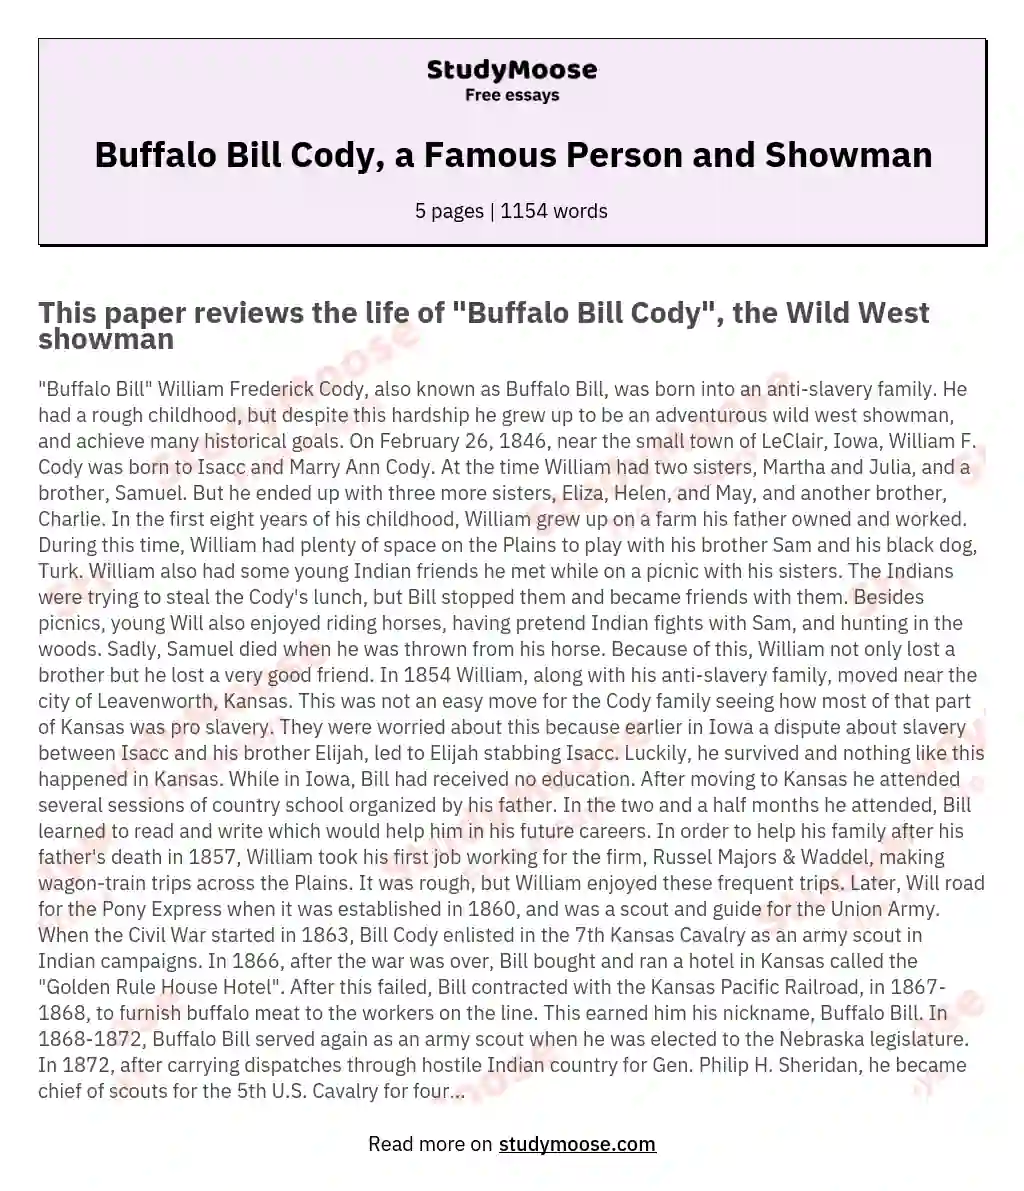 Buffalo Bill Cody, a Famous Person and Showman